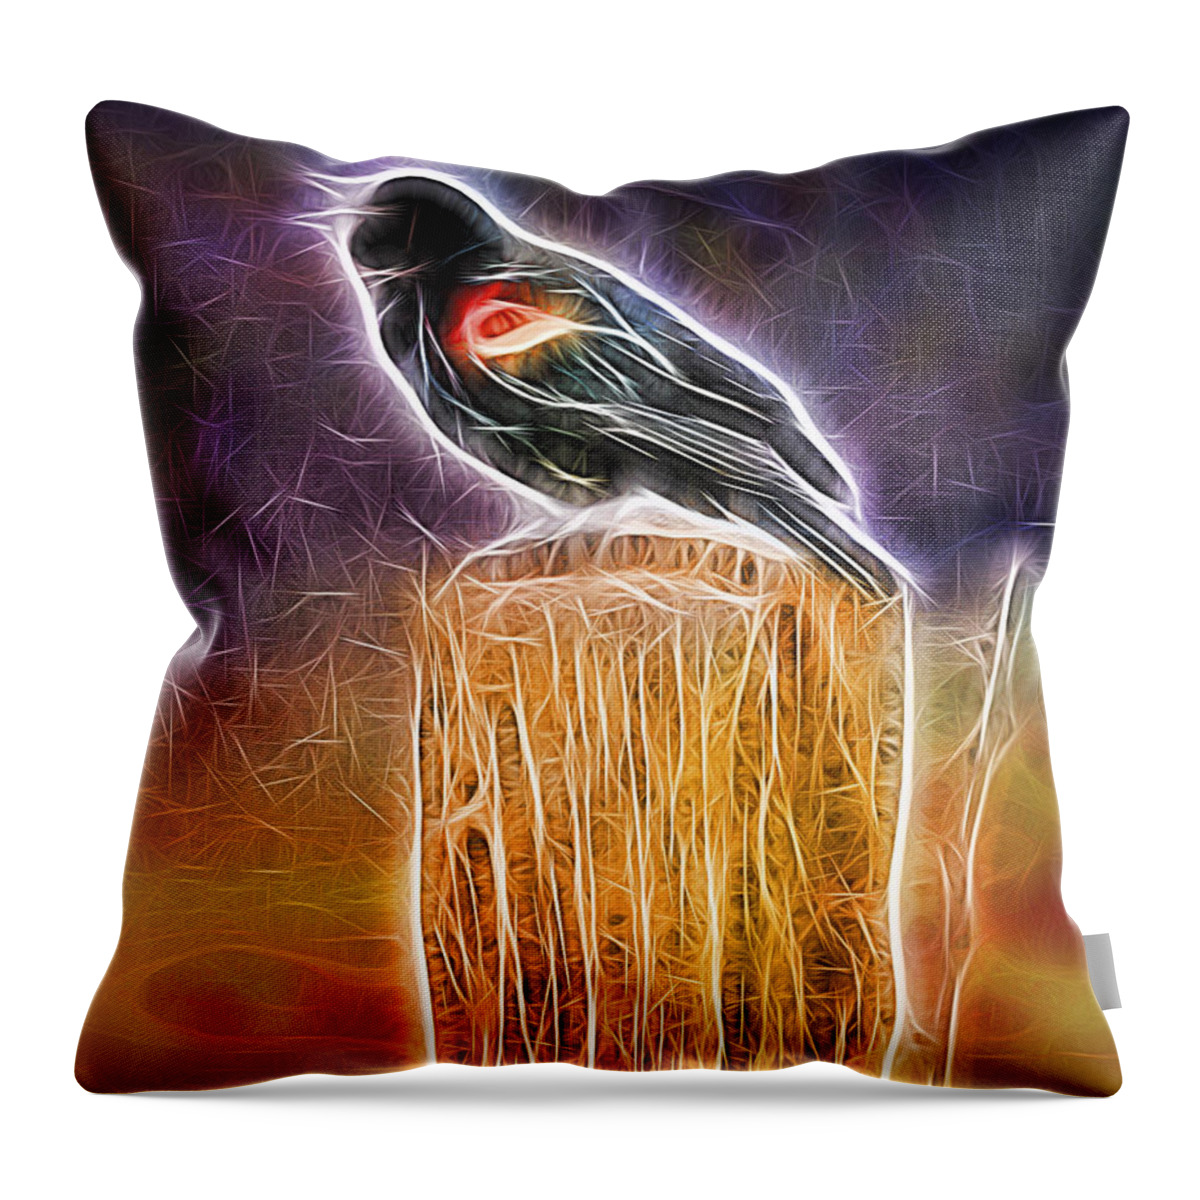 Nature Throw Pillow featuring the digital art Ecstatic Song 3 by William Horden